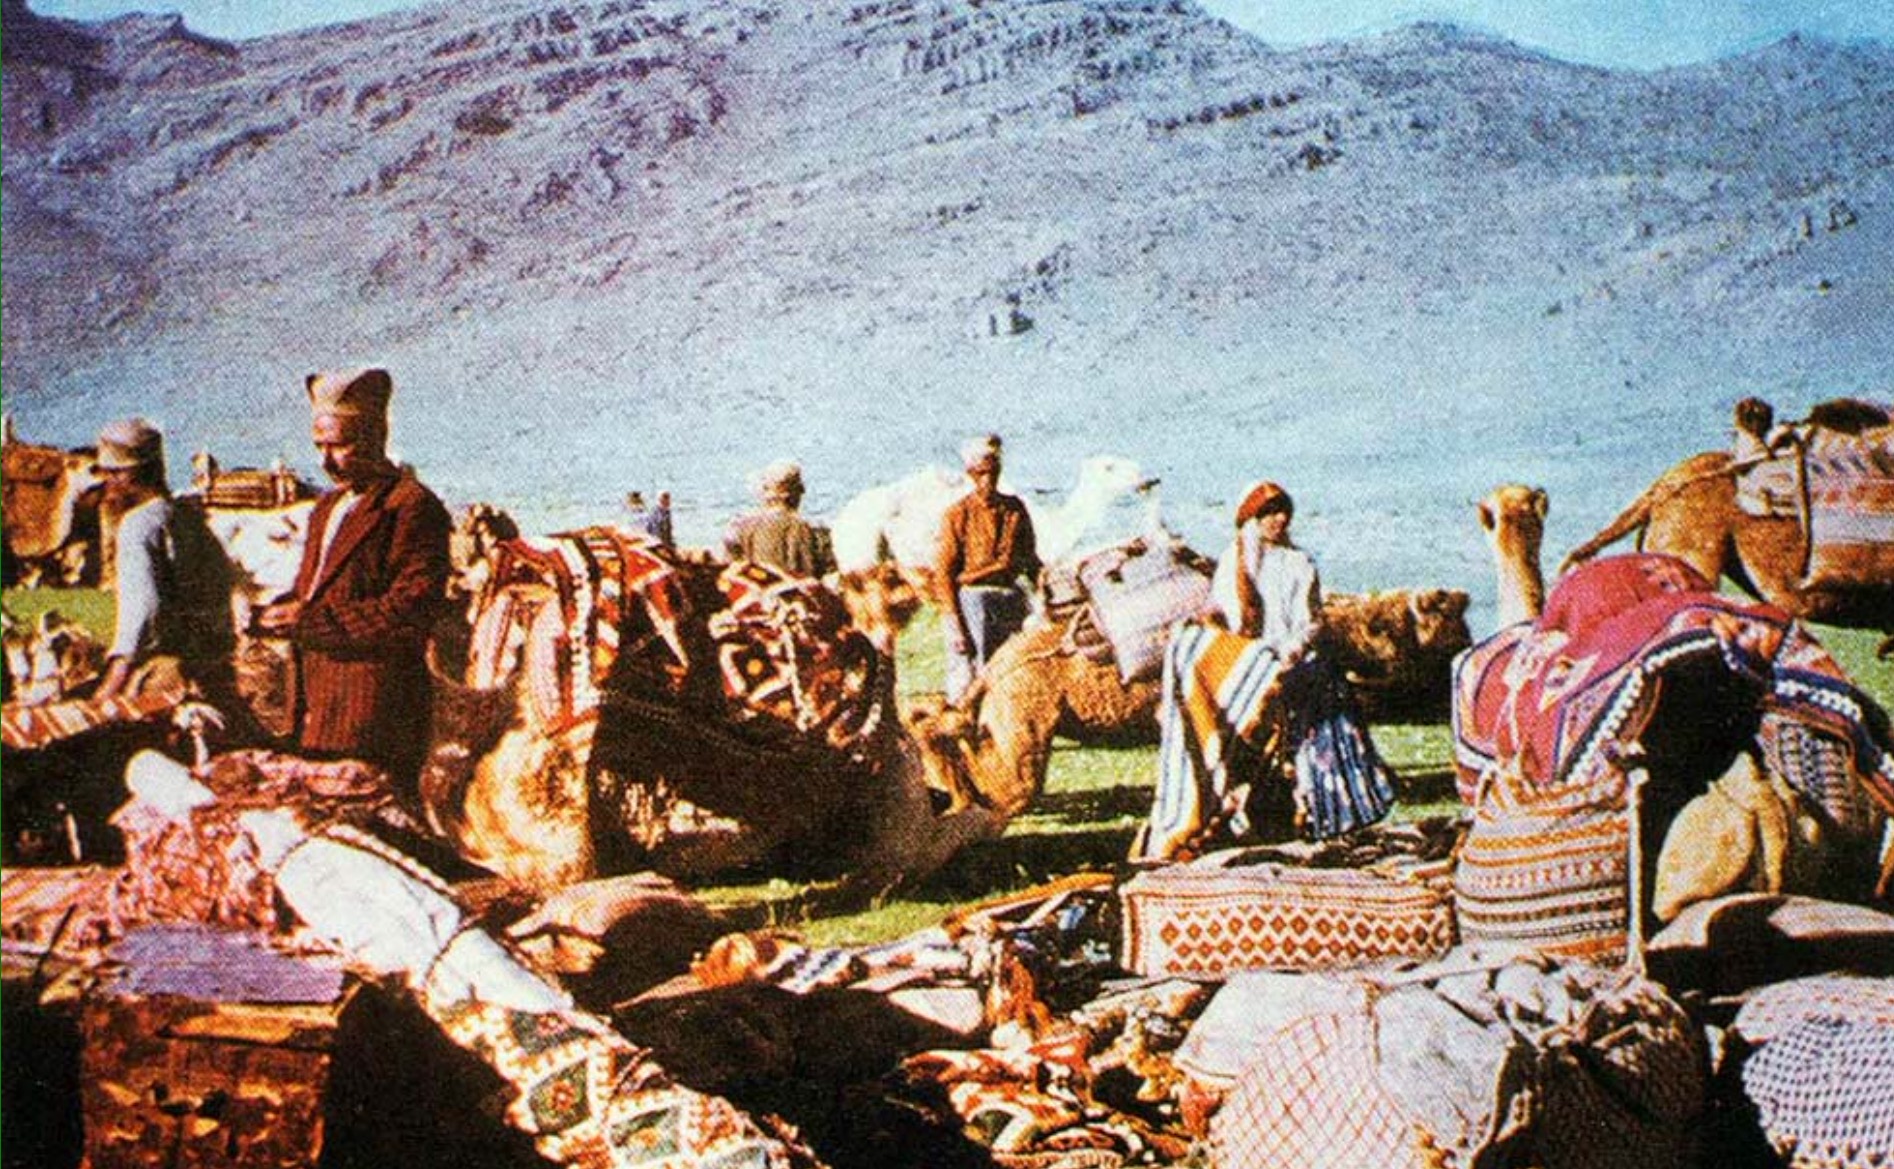 Qashqai people (pronounced [ɢæʃɢɒːˈjiː]; Persian: قشقایی) are a tribal confederation in Iran mostly of Turkic origin. They are also believed to have incorporated Lurs, Kurds, and Arabs. Almost all of them speak a Western Turkic (Oghuz) language known as the Qashqai language — which they call "Turkī" — as well as Persian (the national language of Iran) in formal use. The Qashqai mainly live in the provinces of Fars, Khuzestan, Kohgiluyeh and Boyer-Ahmad, Chaharmahal and Bakhtiari, Bushehr, and southern Isfahan, especially around the cities of Shiraz and Firuzabad in Fars.
The majority of Qashqai people were originally nomadic pastoralists and some remain so today. The traditional nomadic Qashqai traveled with their flocks twice yearly between the summer highland pastures north of Shiraz roughly 480 km or 300 miles south and the winter pastures on lower (and warmer) lands near the Persian Gulf, to the southwest of Shiraz. The majority, however, have now become partially or wholly sedentary. The trend towards settlement has been increasing markedly since the 1960s under government pressure, and encouragement, which has built housing for those willing to settle, starting in the early 20th century during the reign of the Pahlavi dynasty; However, for those who continue their migratory lifestyle, the Iranian government maintains and controls travel corridors for the Qashqai and their livestock, and other populations practicing pastoral migrations.The Qashqai are made up of five major tribes: the Amale (Qashqai) / Amaleh (Persian), the Dere-Shorlu / Darreh-Shuri, the Kashkollu / Kashkuli, the Shishbeyli / Sheshboluki and the Eymur / Farsimadan. Smaller tribes include the Qaracha / Qarache'i, Rahimli / Rahimi and Safi-Khanli / Safi-Khani.